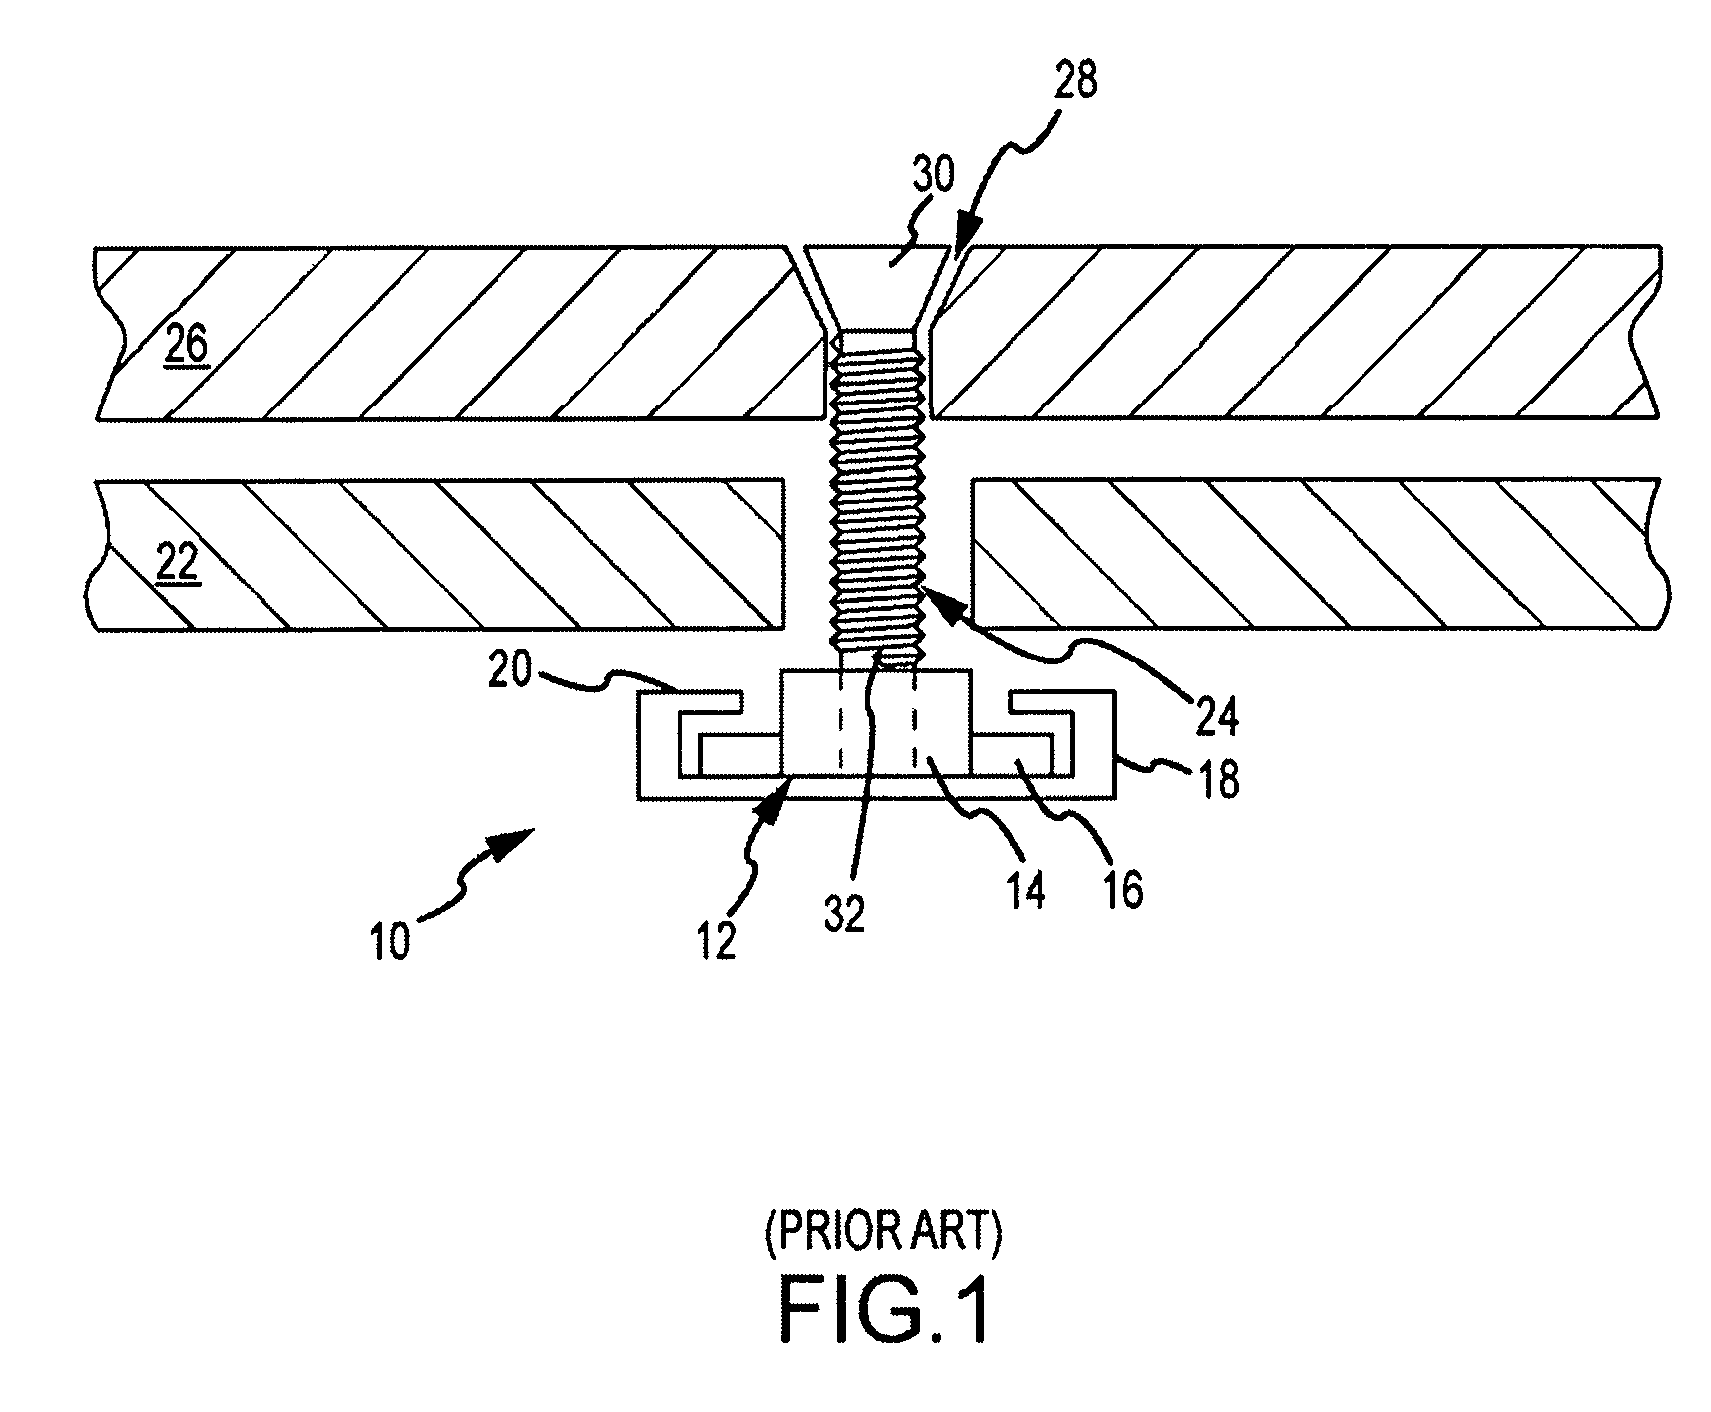 Integrated nutplate and clip for a floating fastener and method of manufacture and assembly